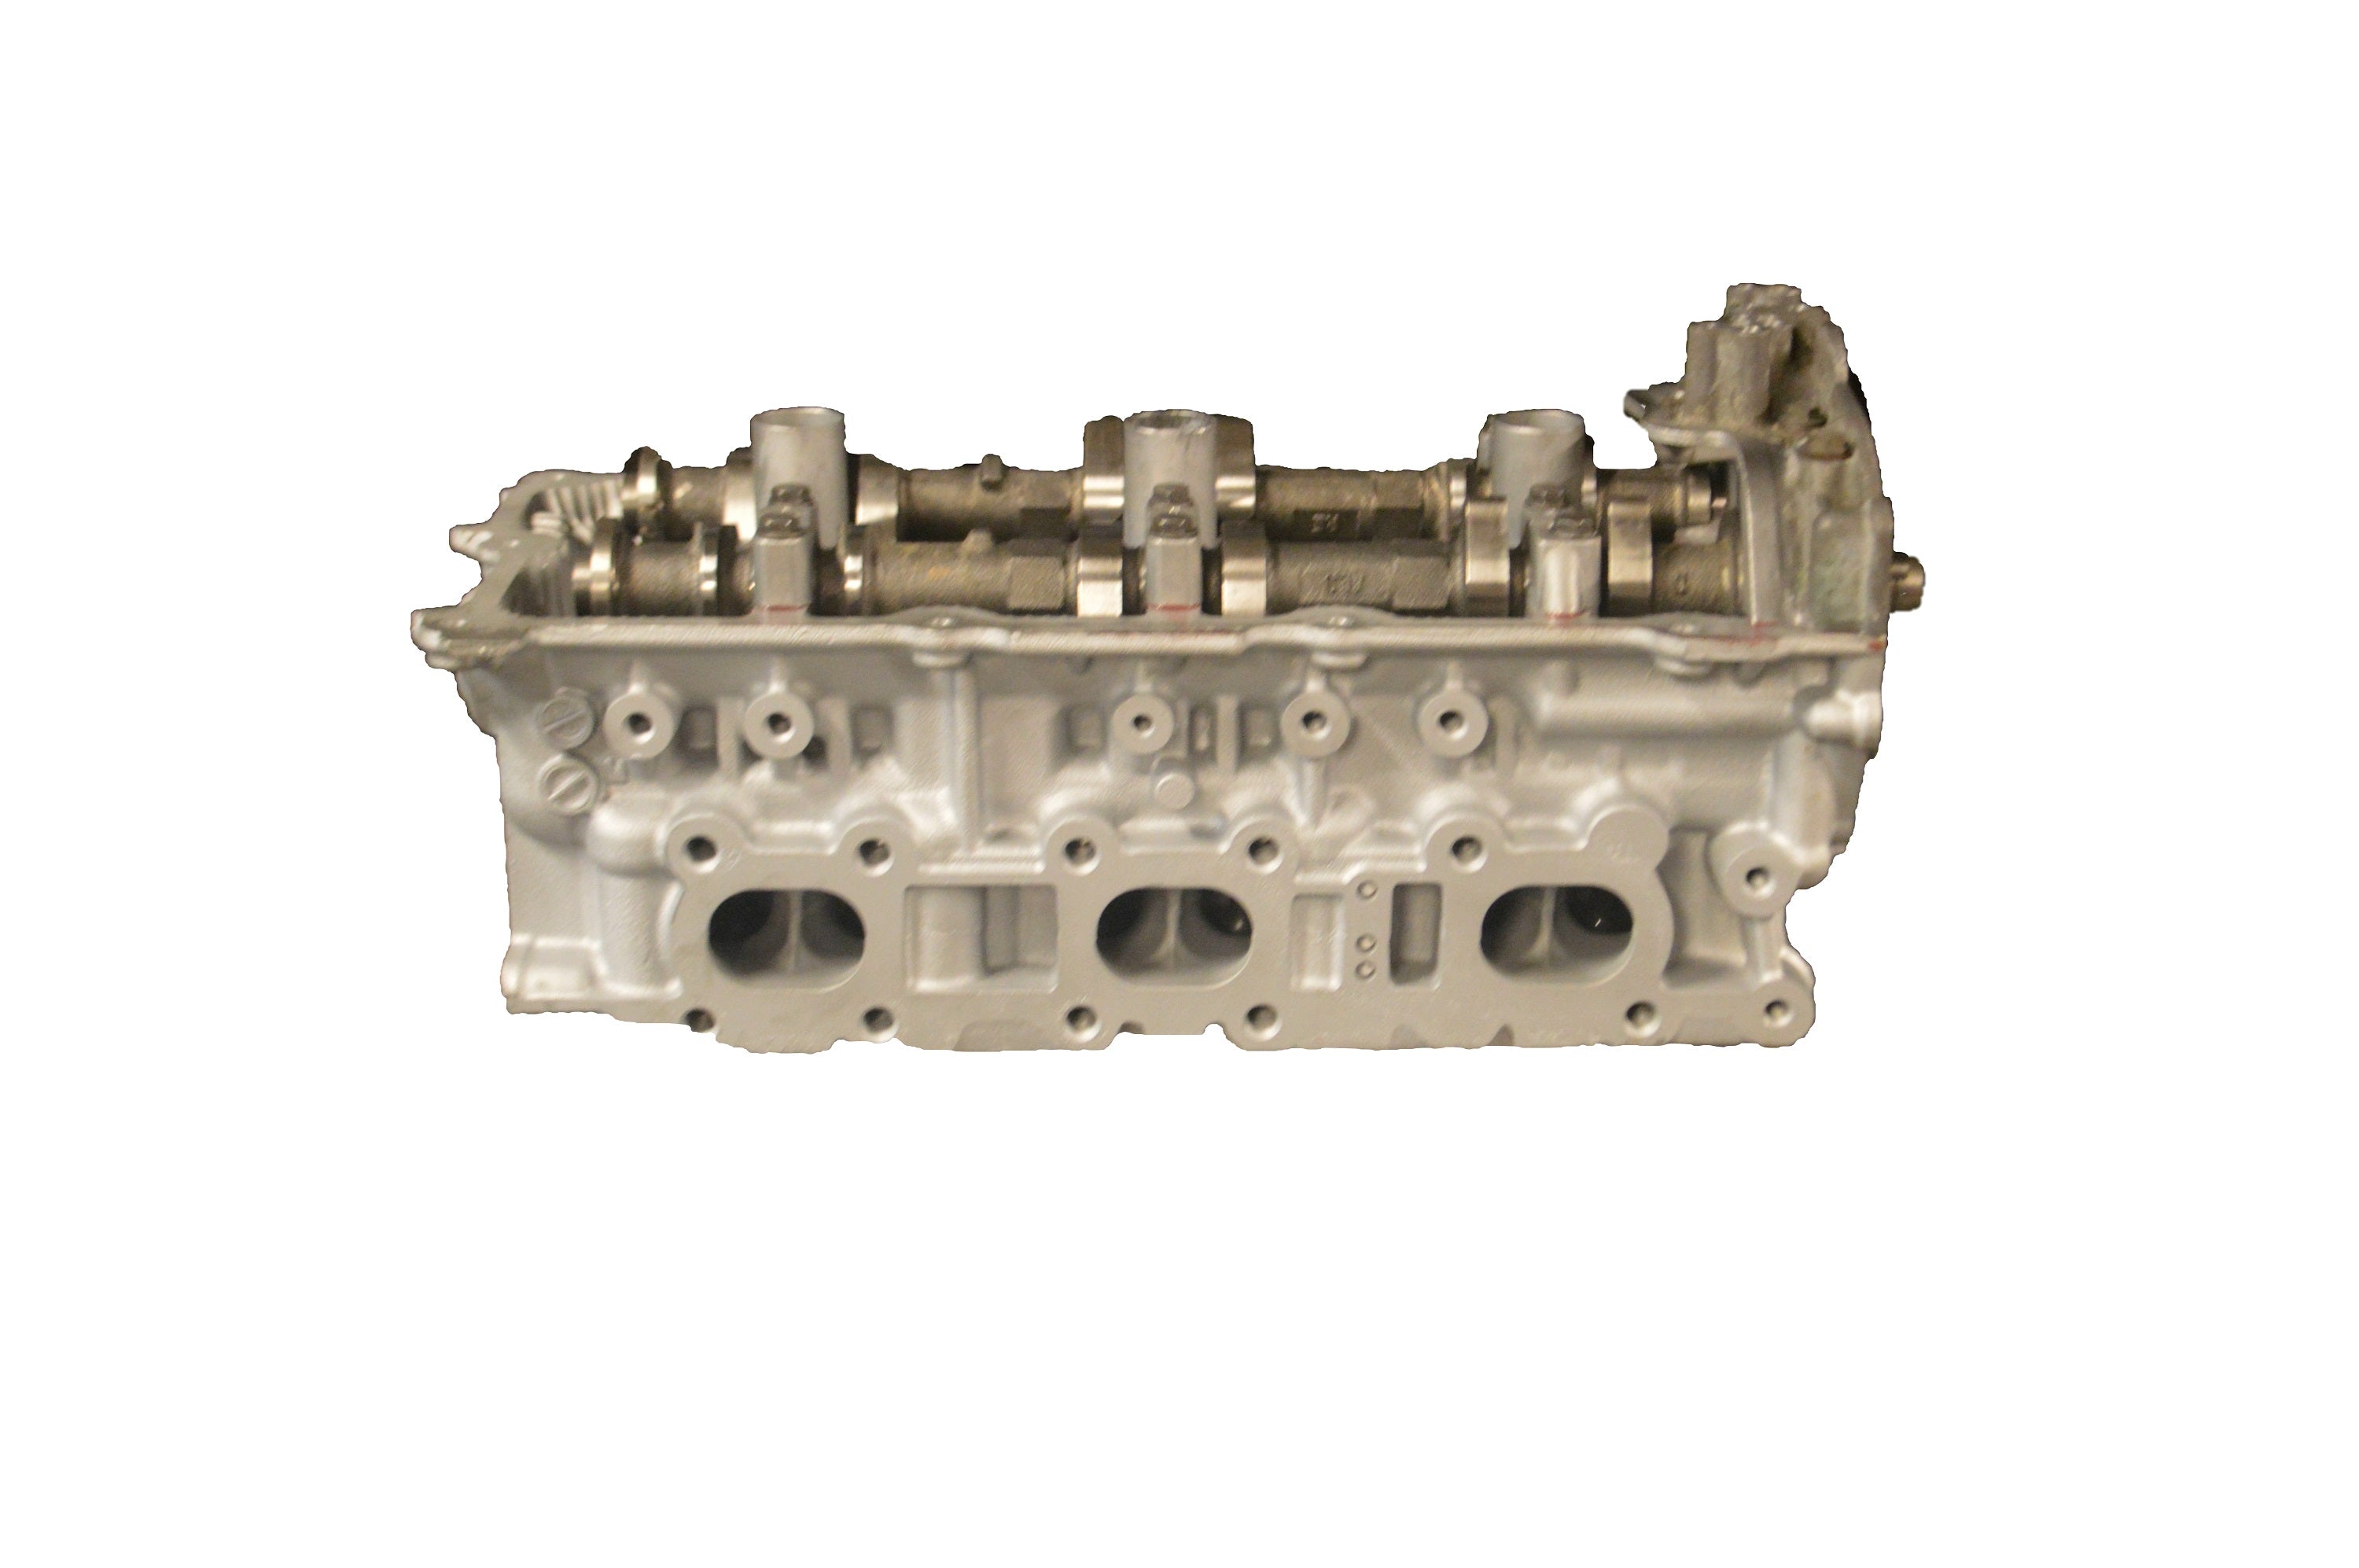 Shop for ENGINE QUEST Cylinder Heads and Components 